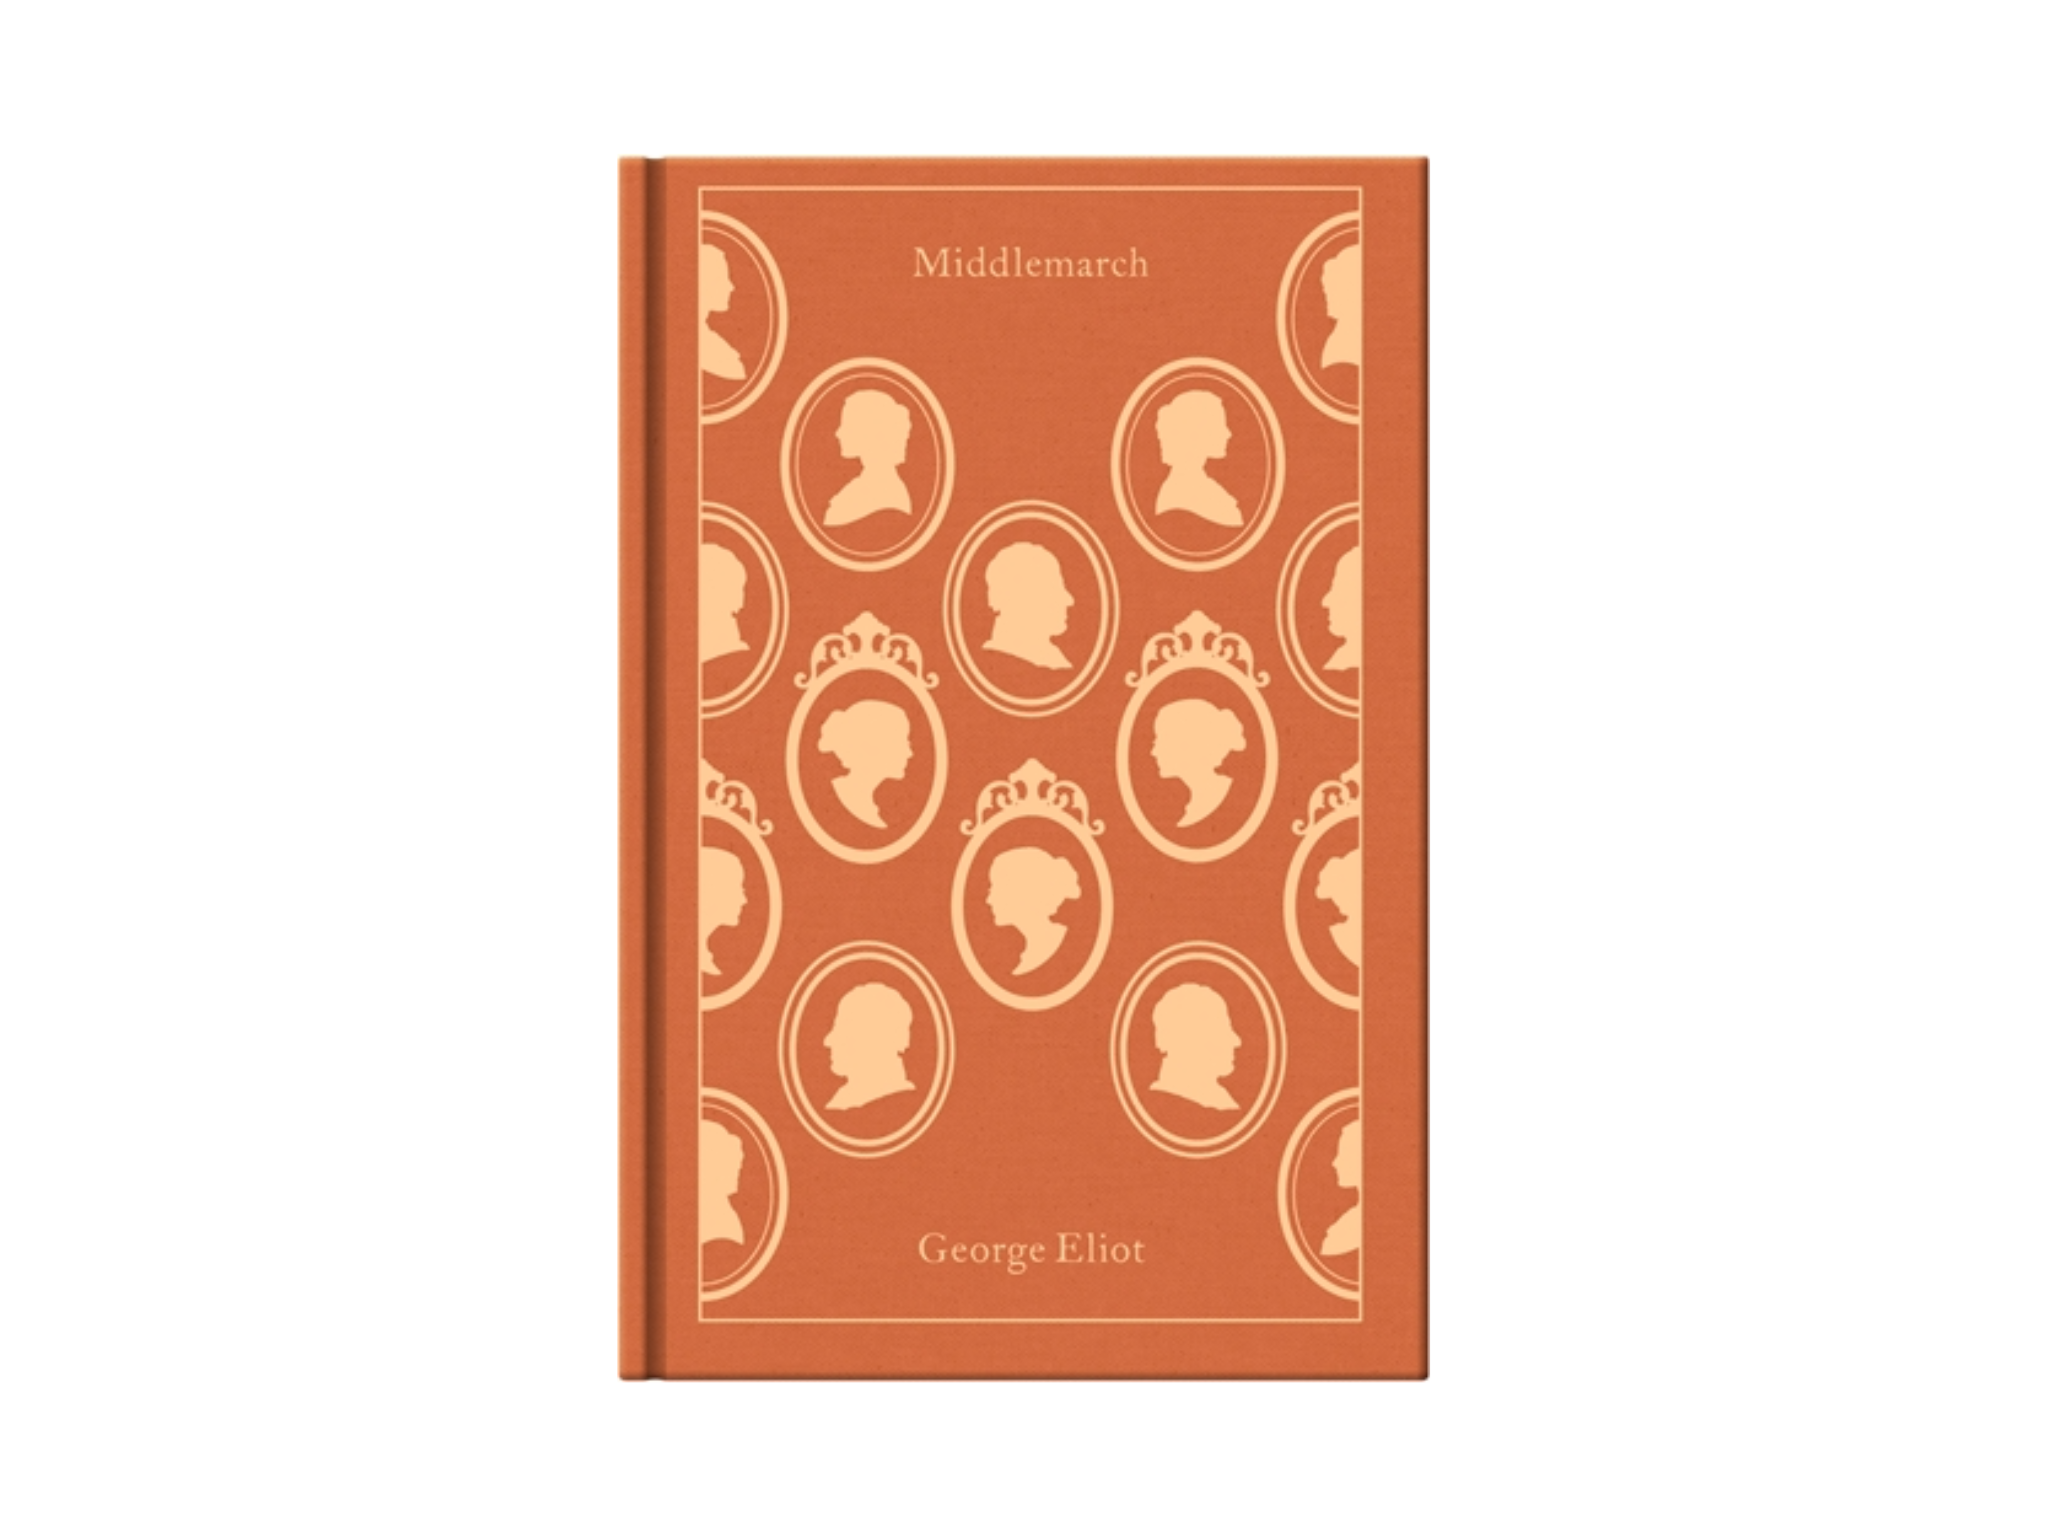 Penguin Clothbound Classics, Middlemarch by George Eliot